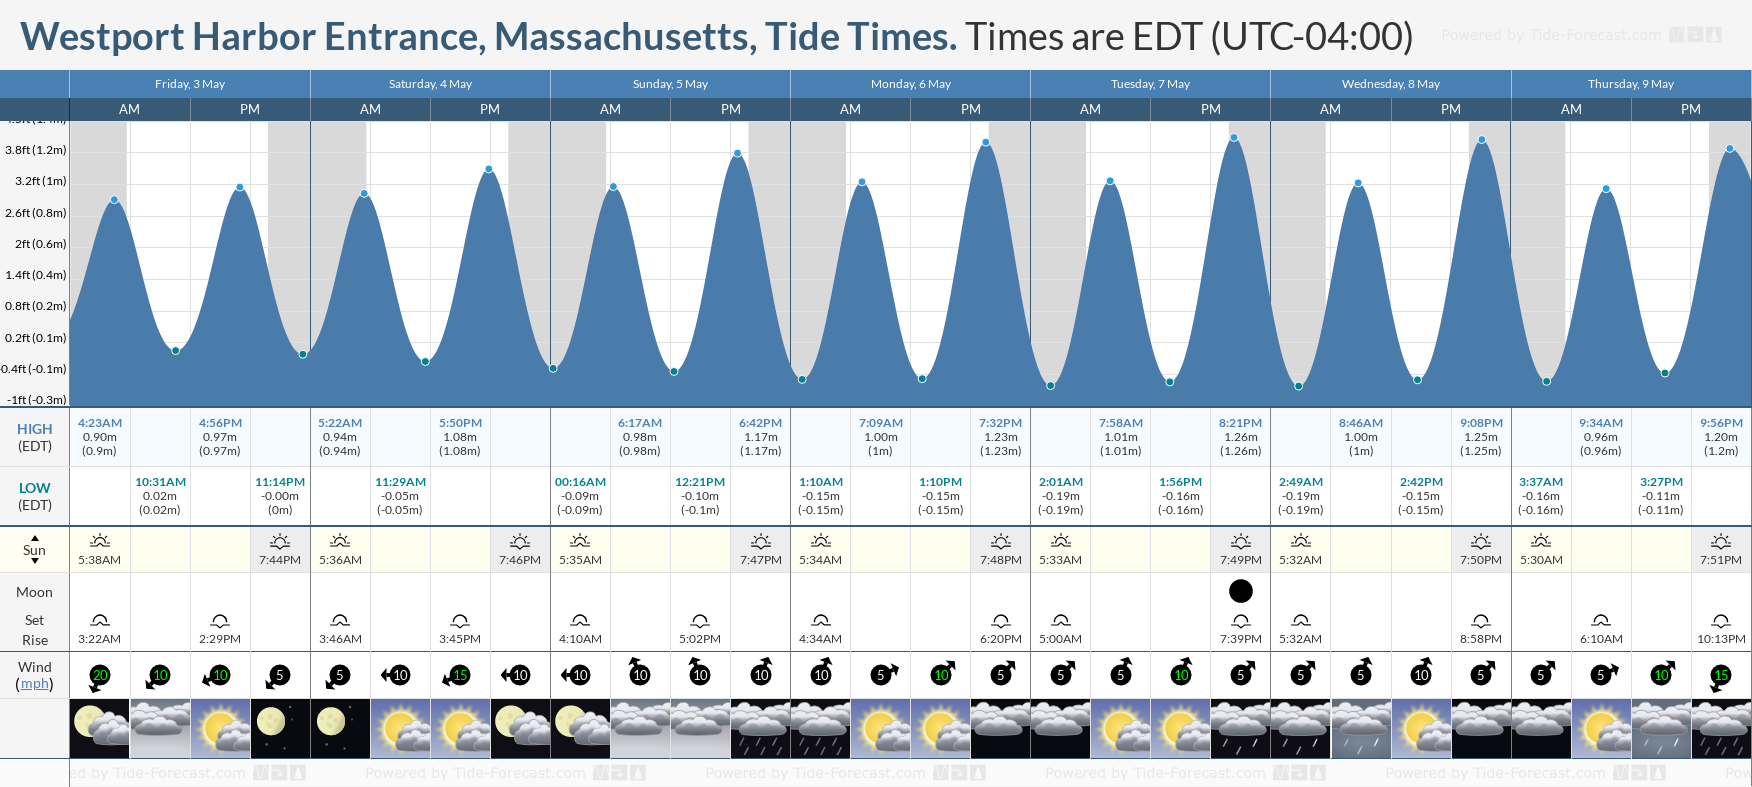 Westport Harbor Entrance, Massachusetts Tide Chart including high and low tide tide times for the next 7 days